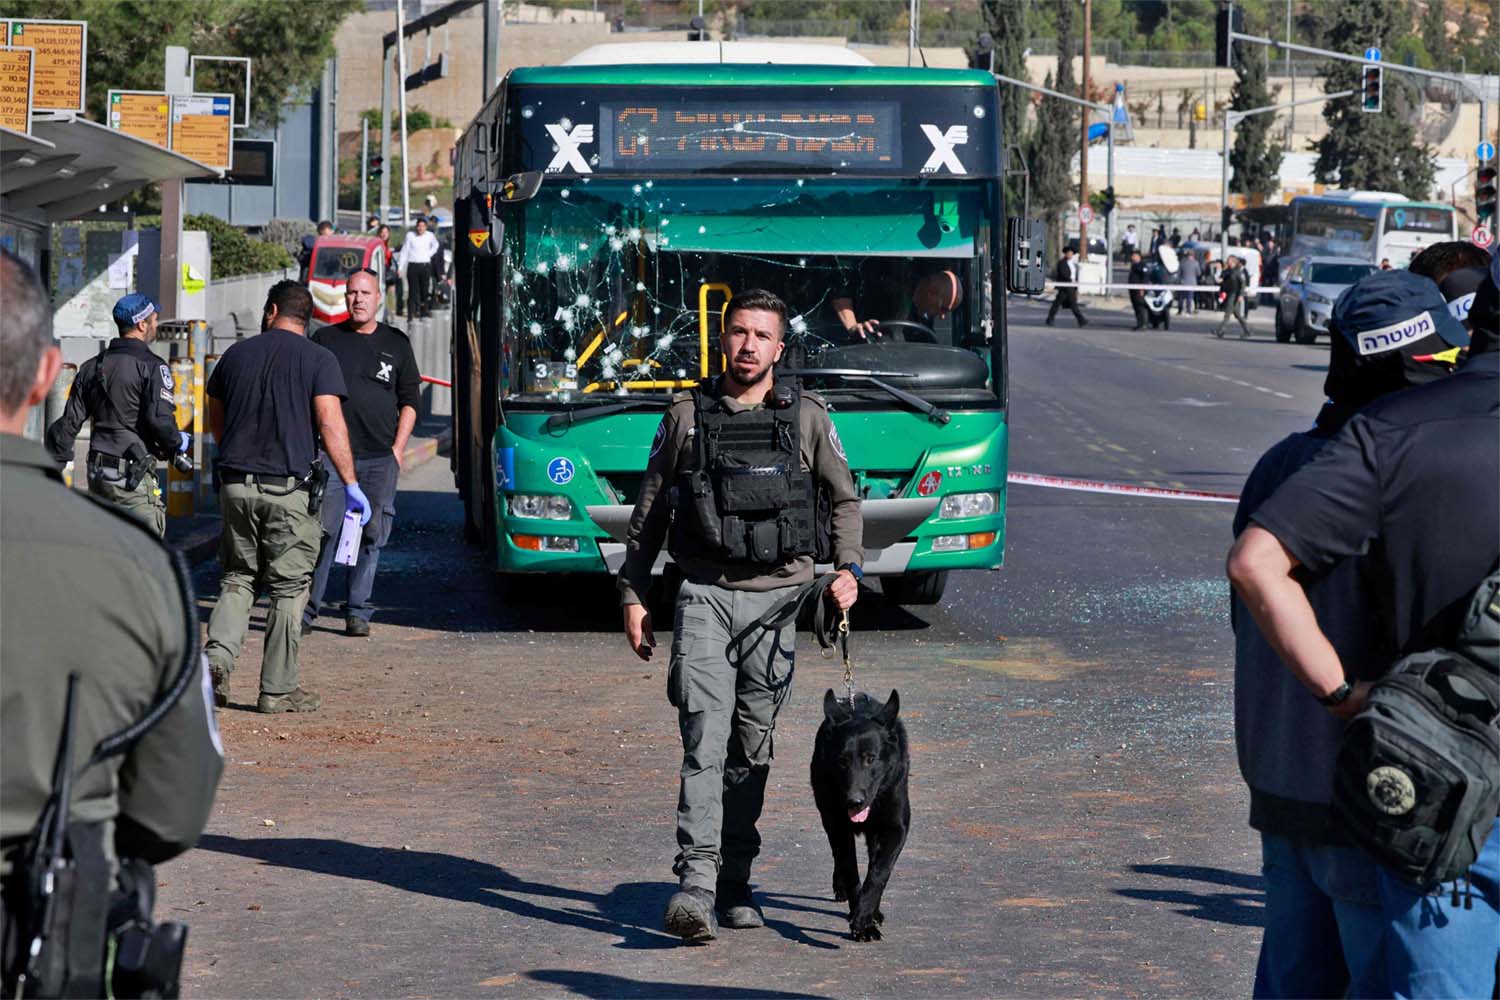 The explosions follow months of tension in the occupied West Bank